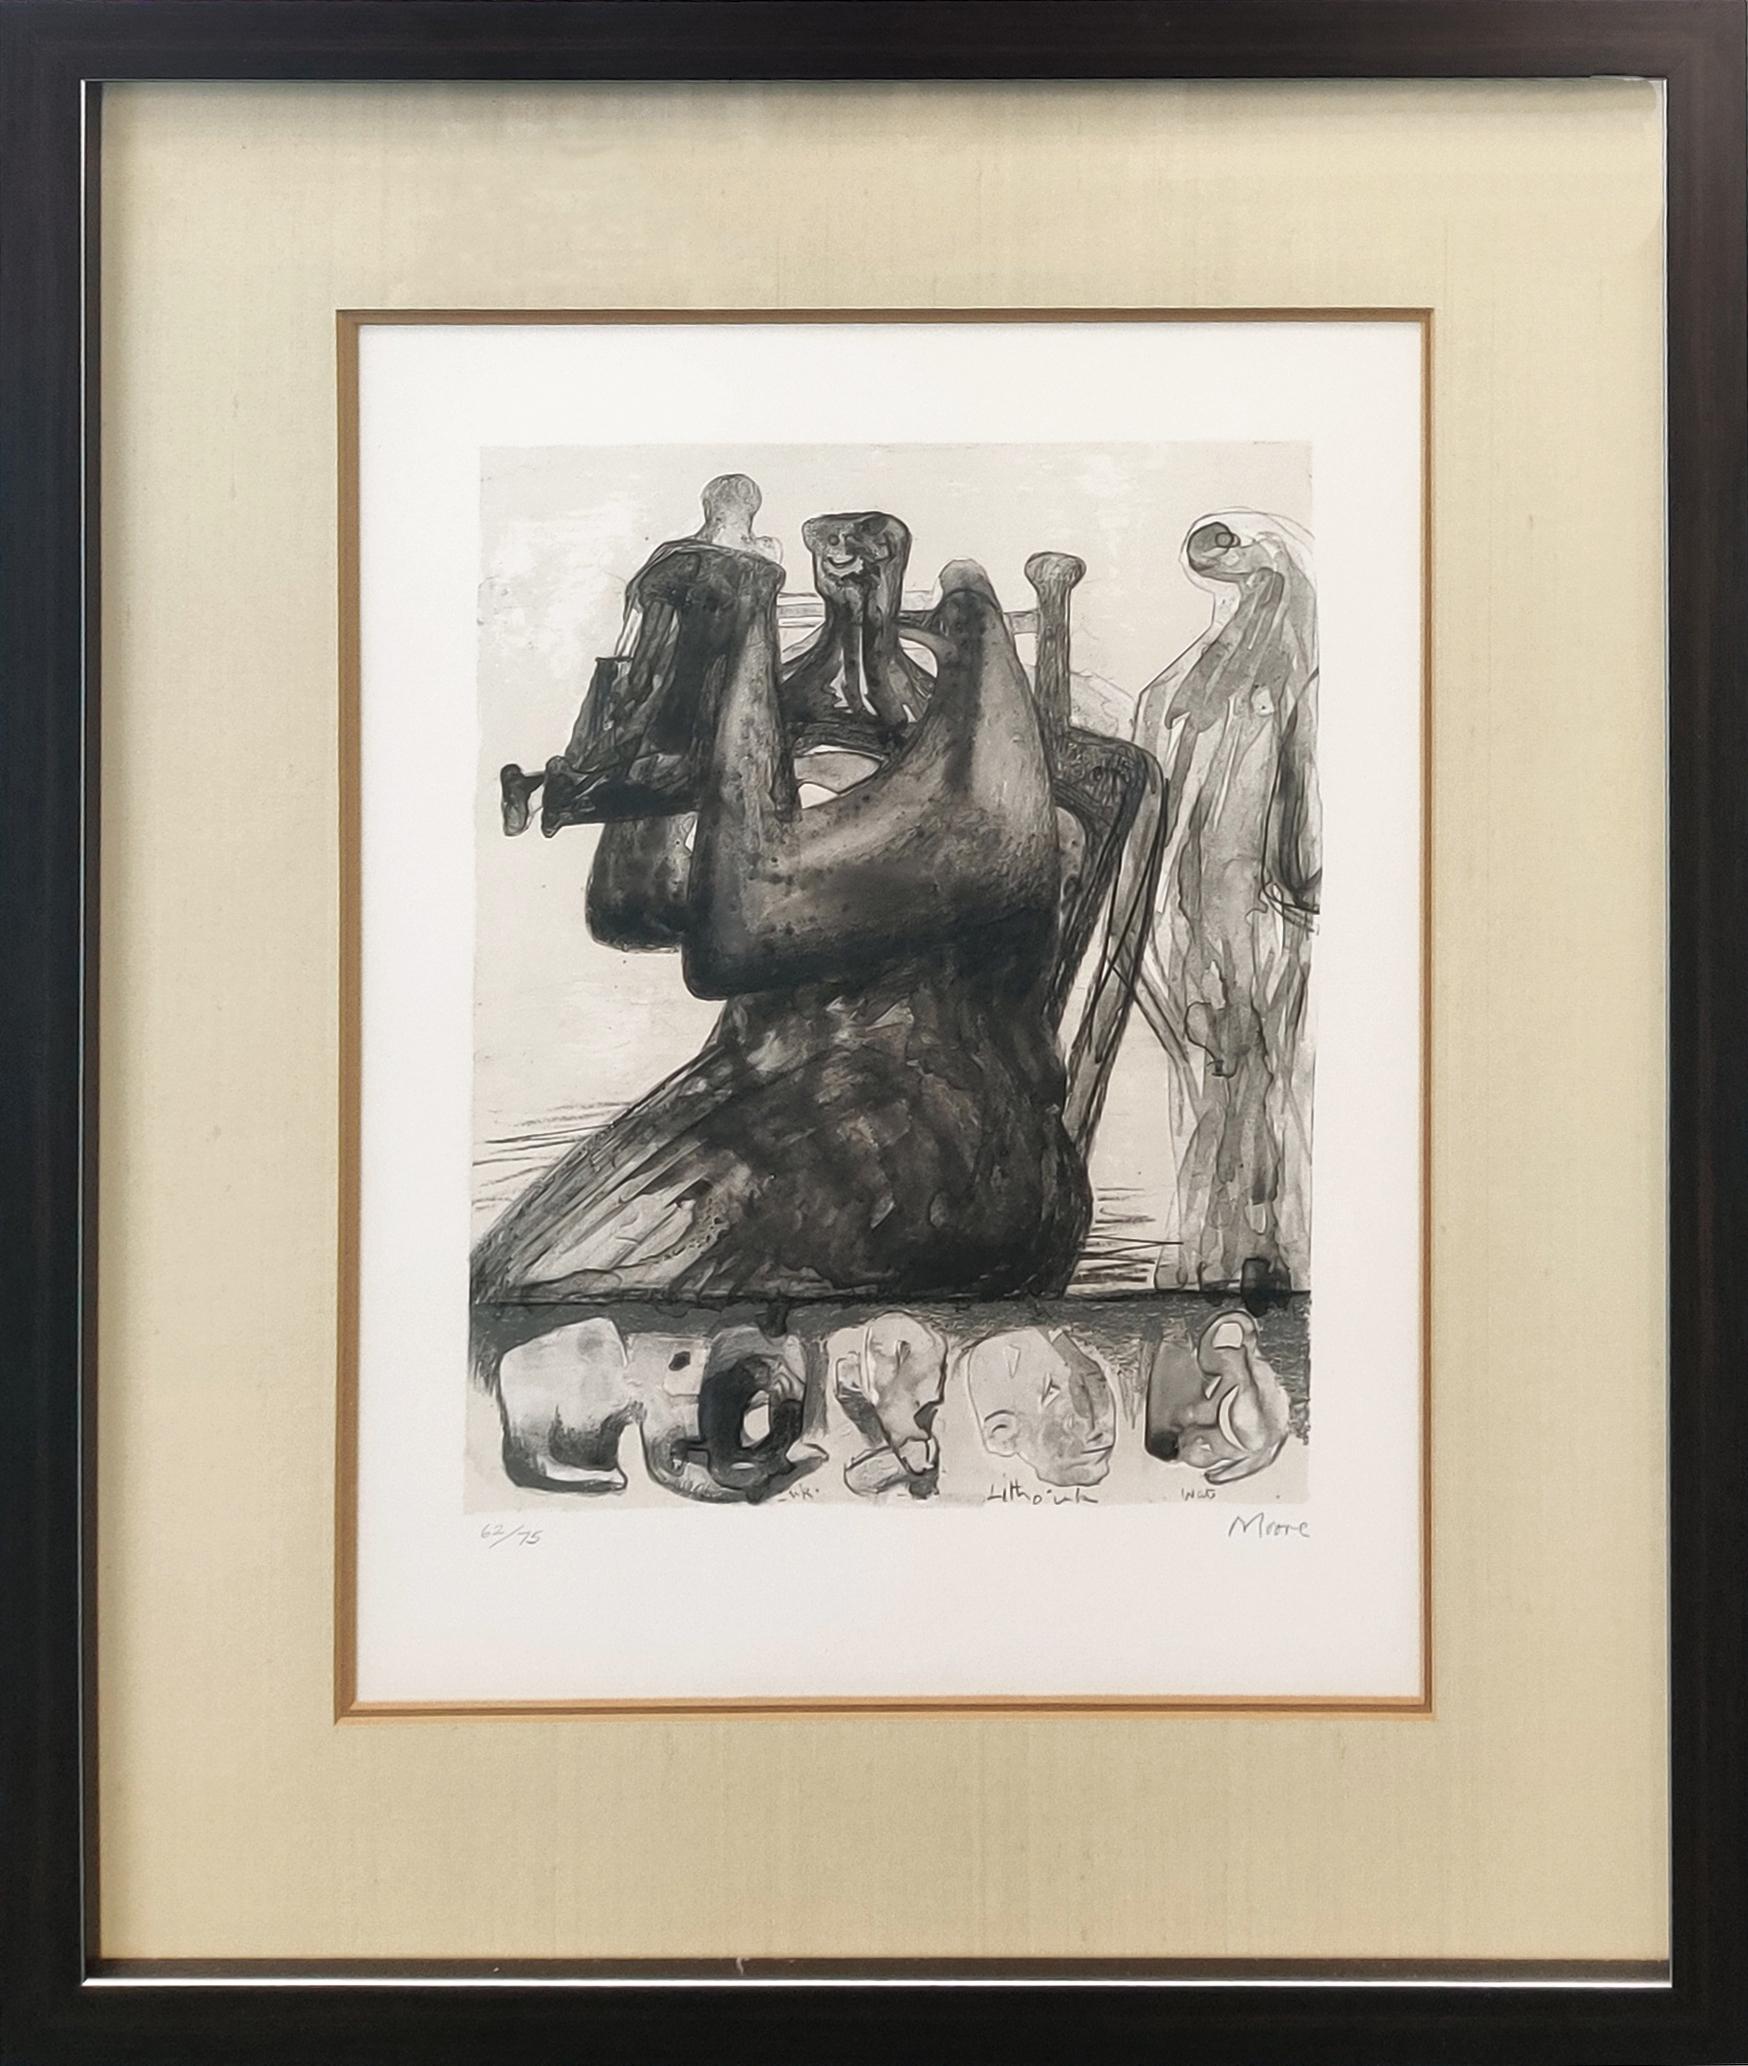 MOTHER AND CHILD WITH BORDER DESIGN - Print by Henry Moore